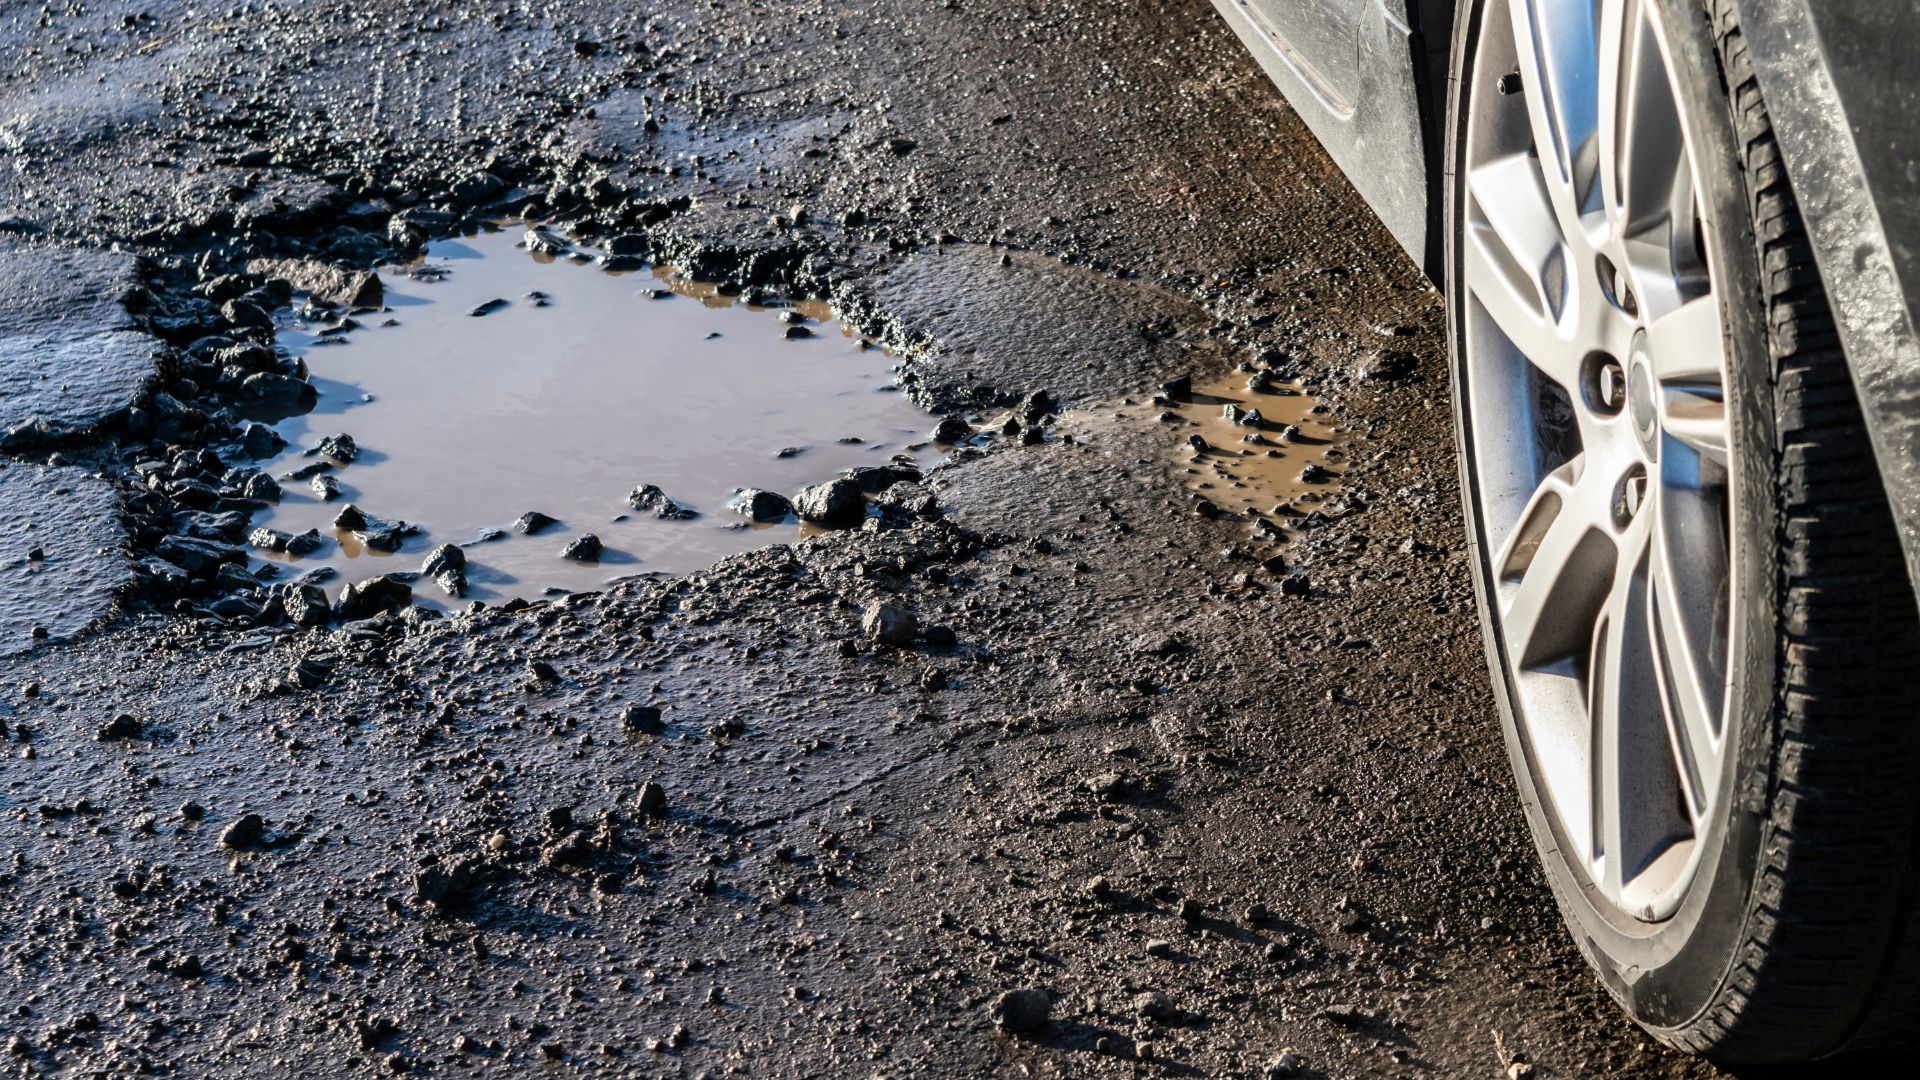 a puddle of water next to a car tire.